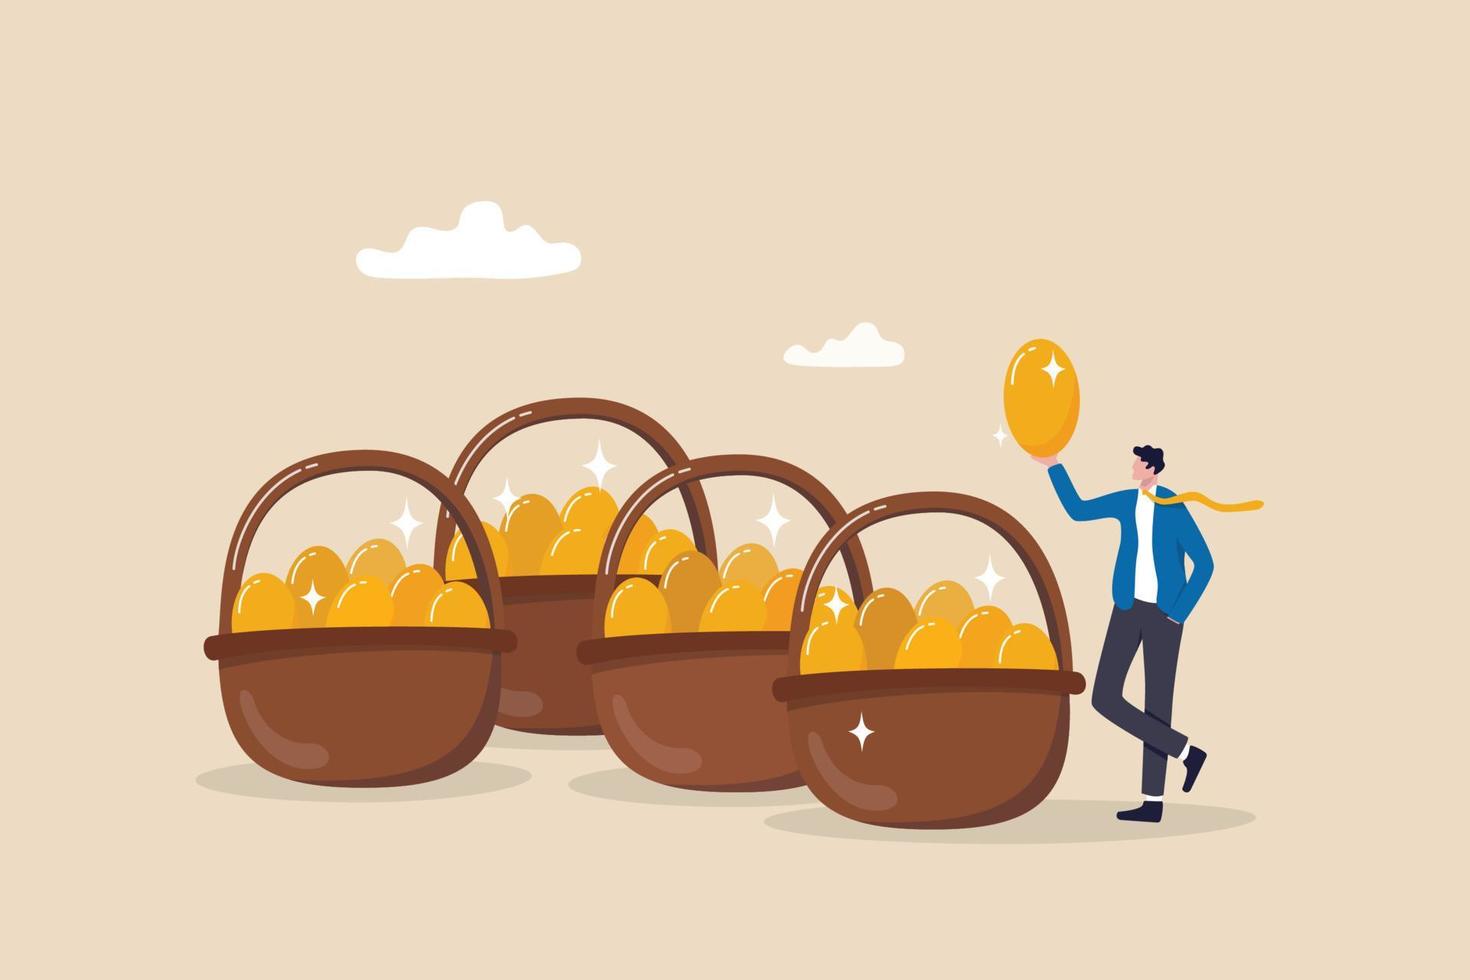 Diversification, investment portfolio strategy to reduce risk and maximize return, earning and profit, asset allocation concept, businessman holding golden eggs diversify by putting in many baskets. vector